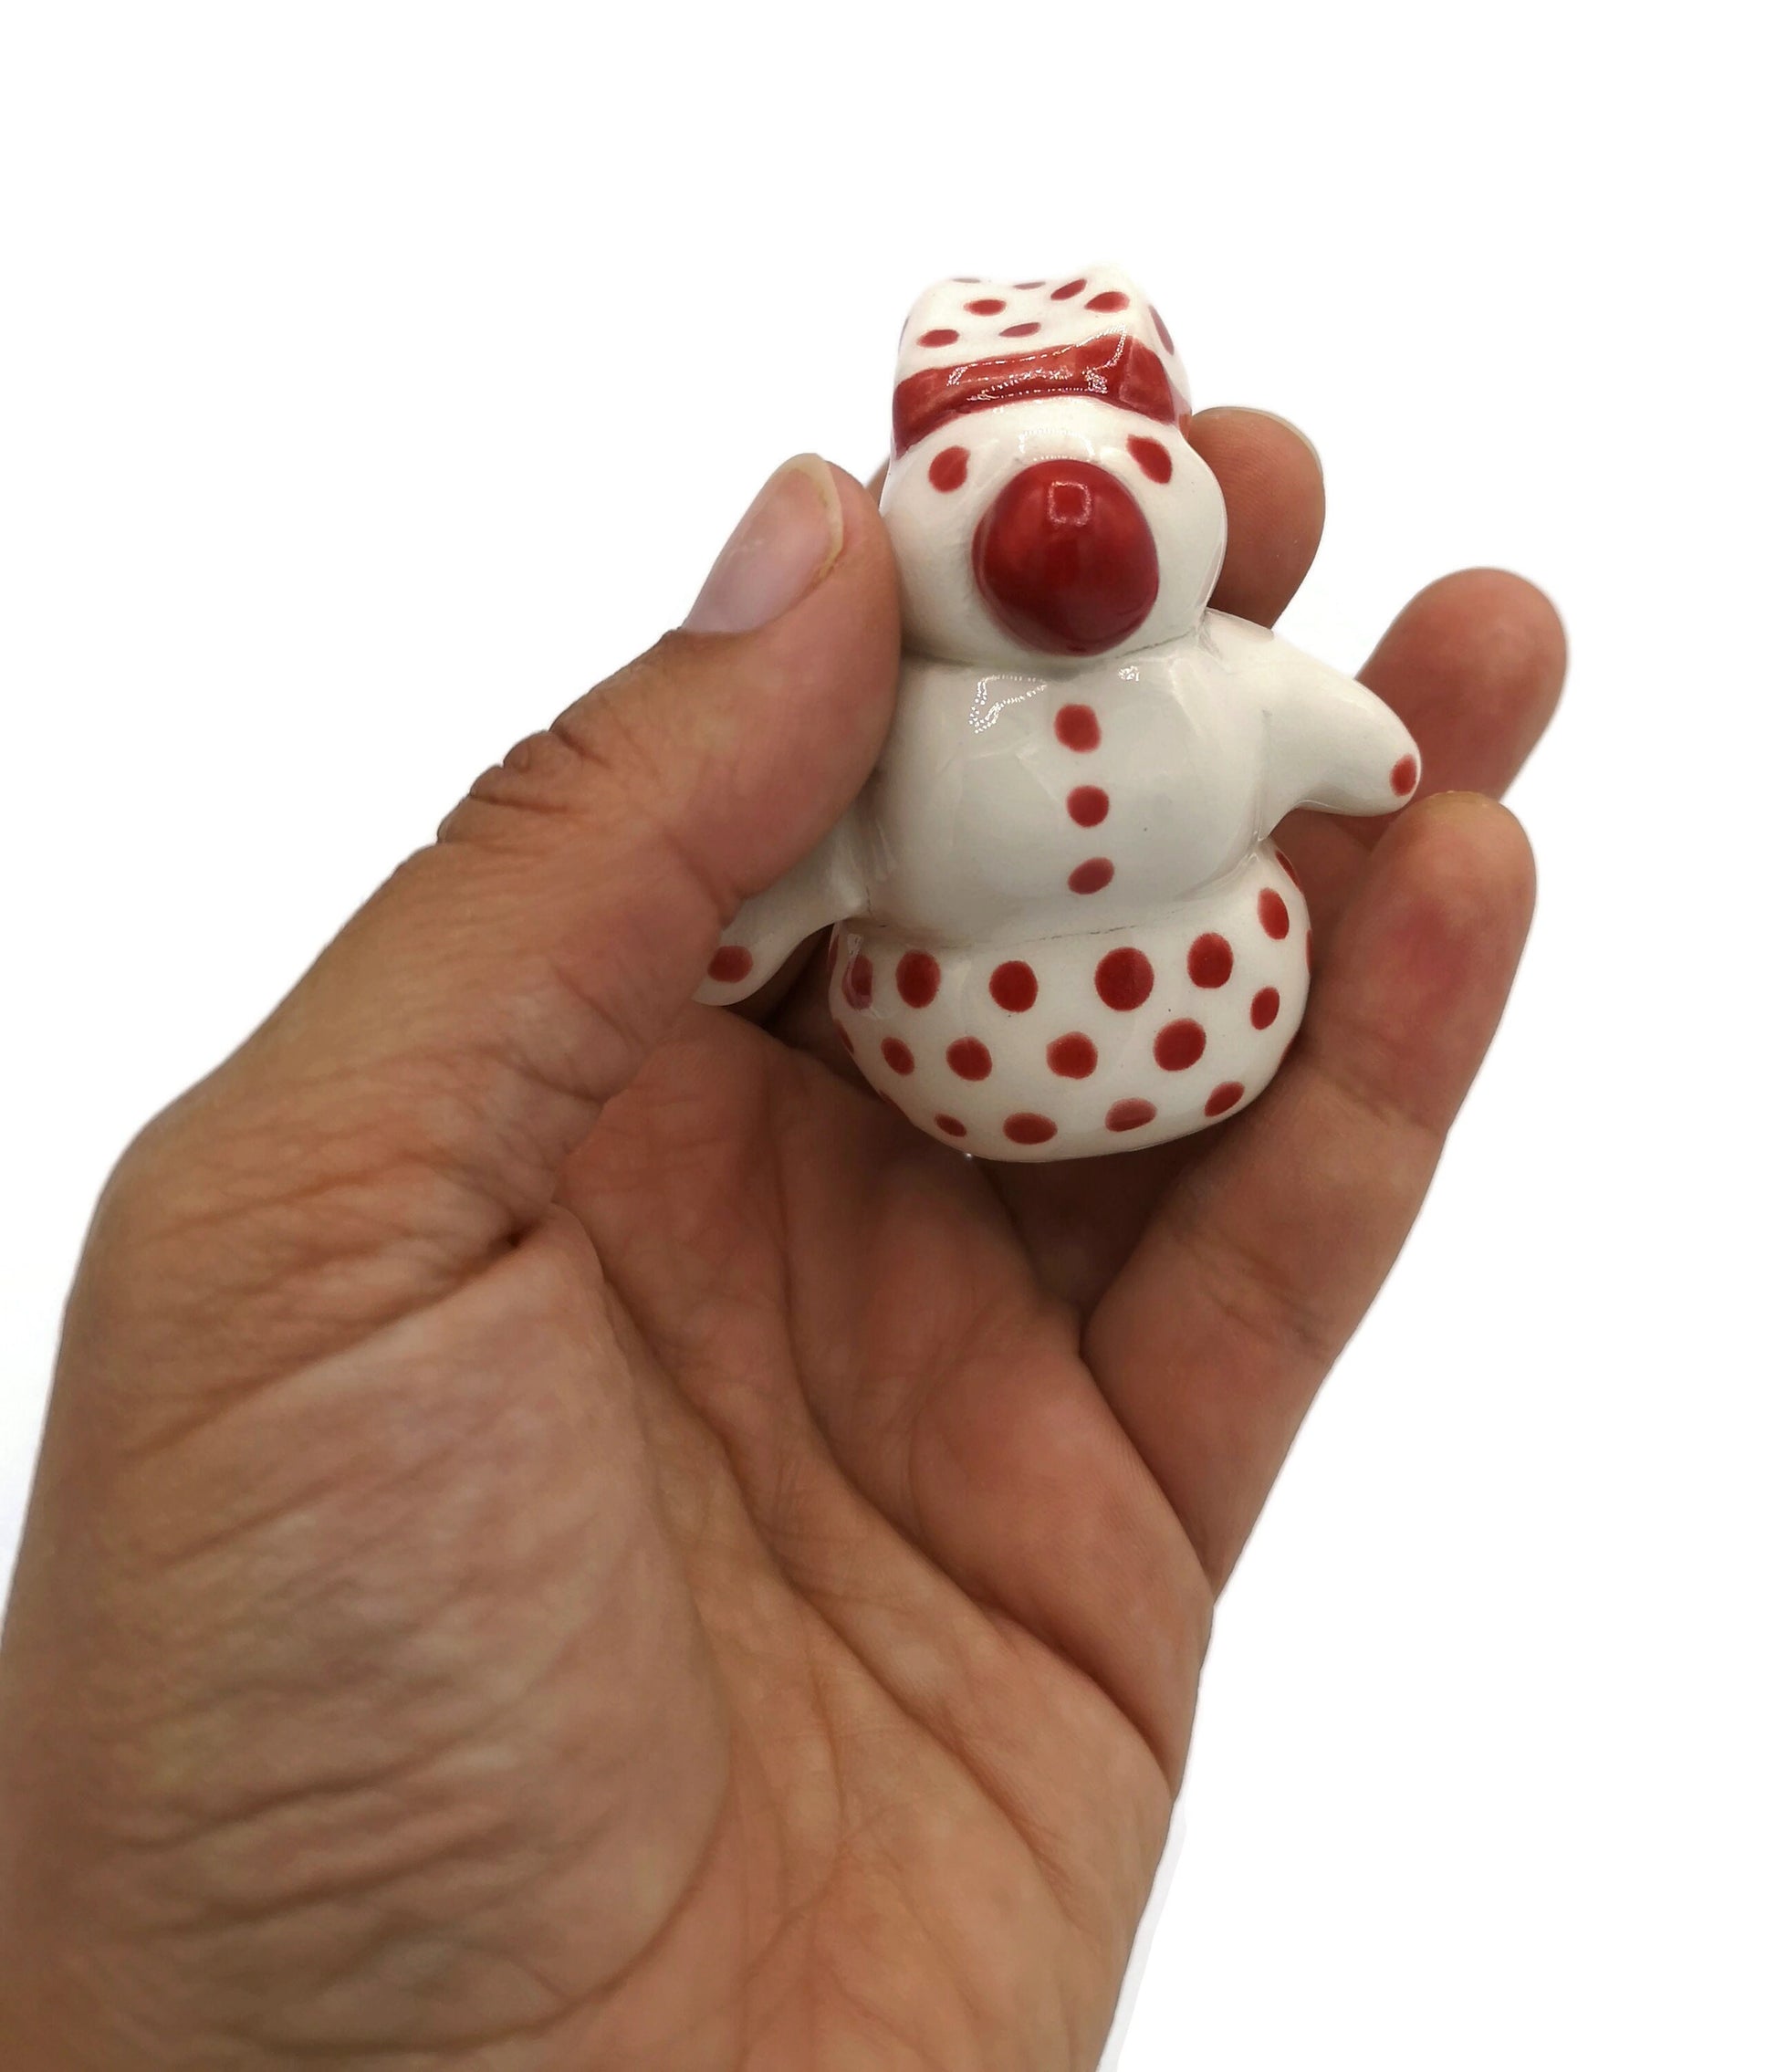 ceramic snowman figurine, Miniature snowman ornament, Gifts For Her Christmas Clearance Items, Best Gifts For Him, Best Sellers - Ceramica Ana Rafael